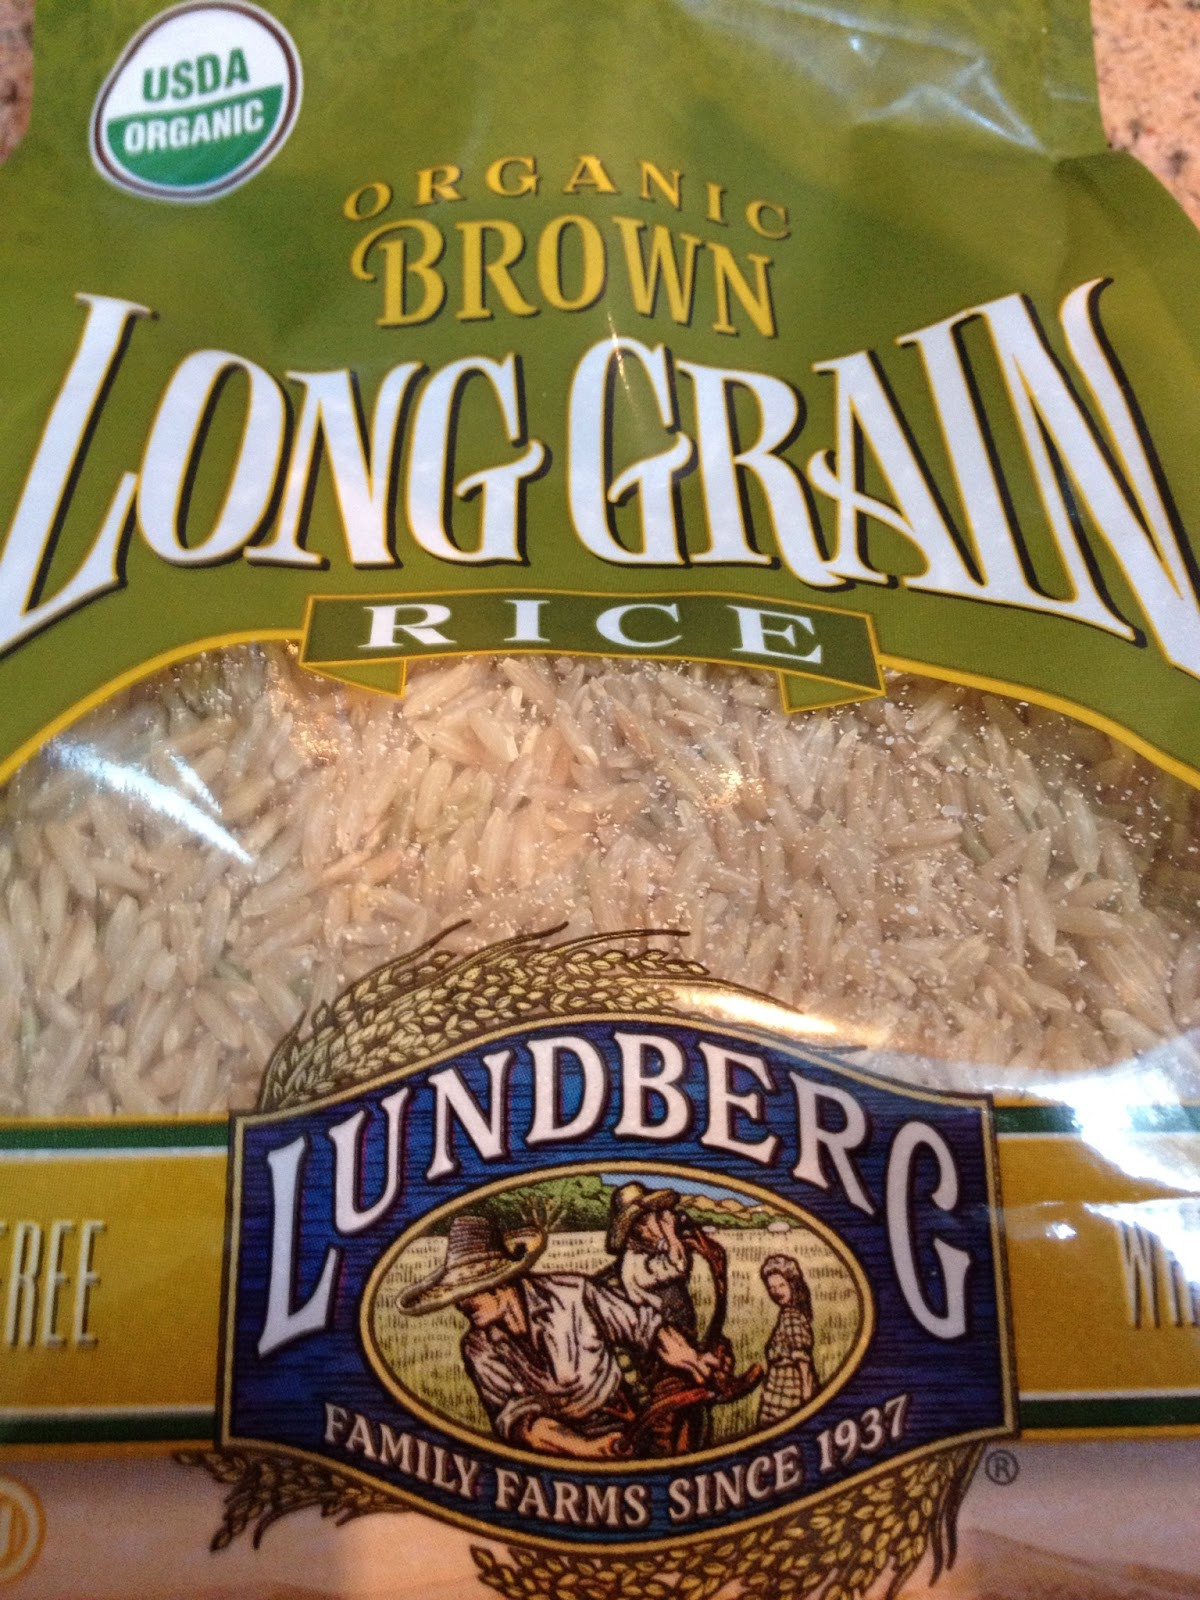 Della Organic Brown Rice
 Do You Really Know What You re Eating Boll weevils in